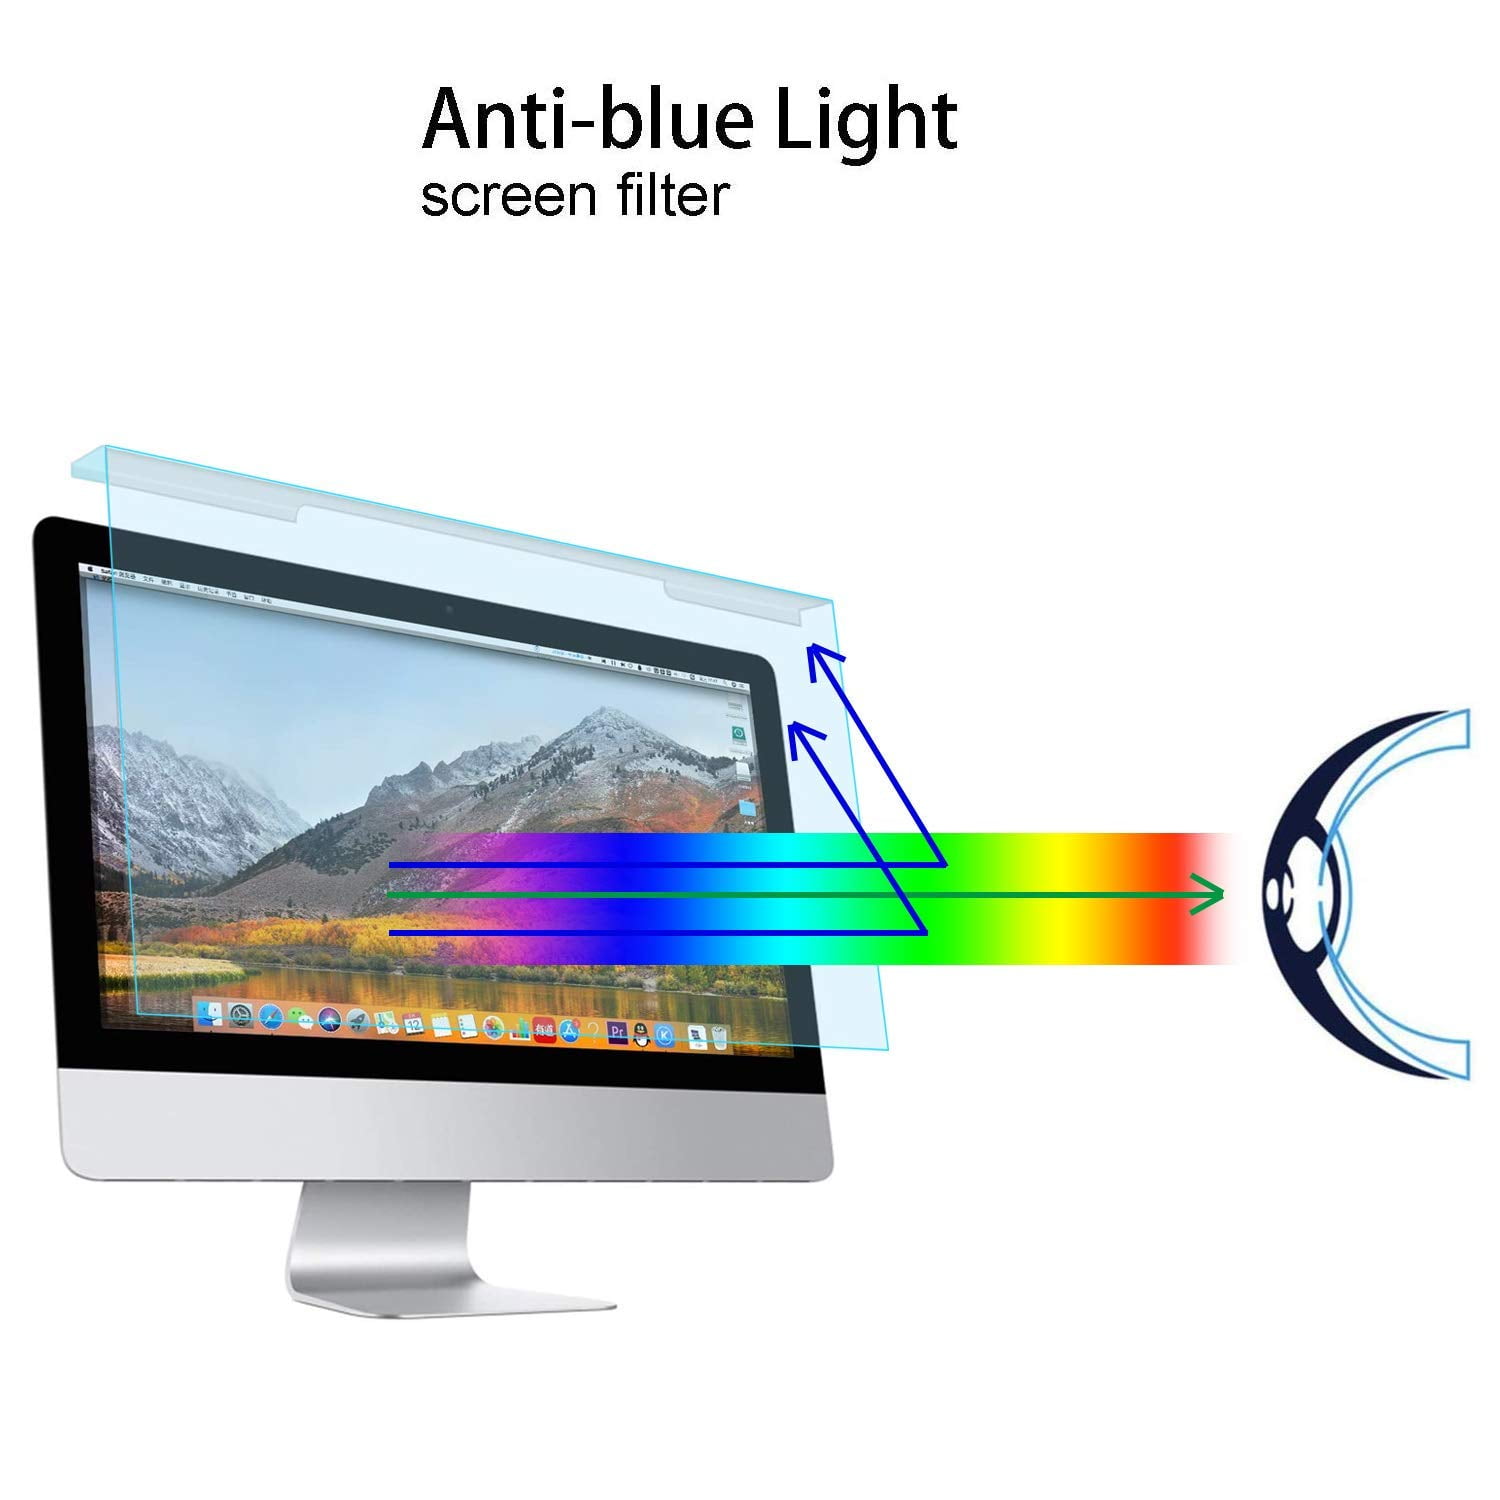 Blue Light Blocking Screen Filter for HP,Dell,ASUS,Lenovo,Acer 13.3 inch Laptops,PAVOSCREEN Protects Eyesight,No Bubble,Easy Installation HD Clear Screen Protector 16:9